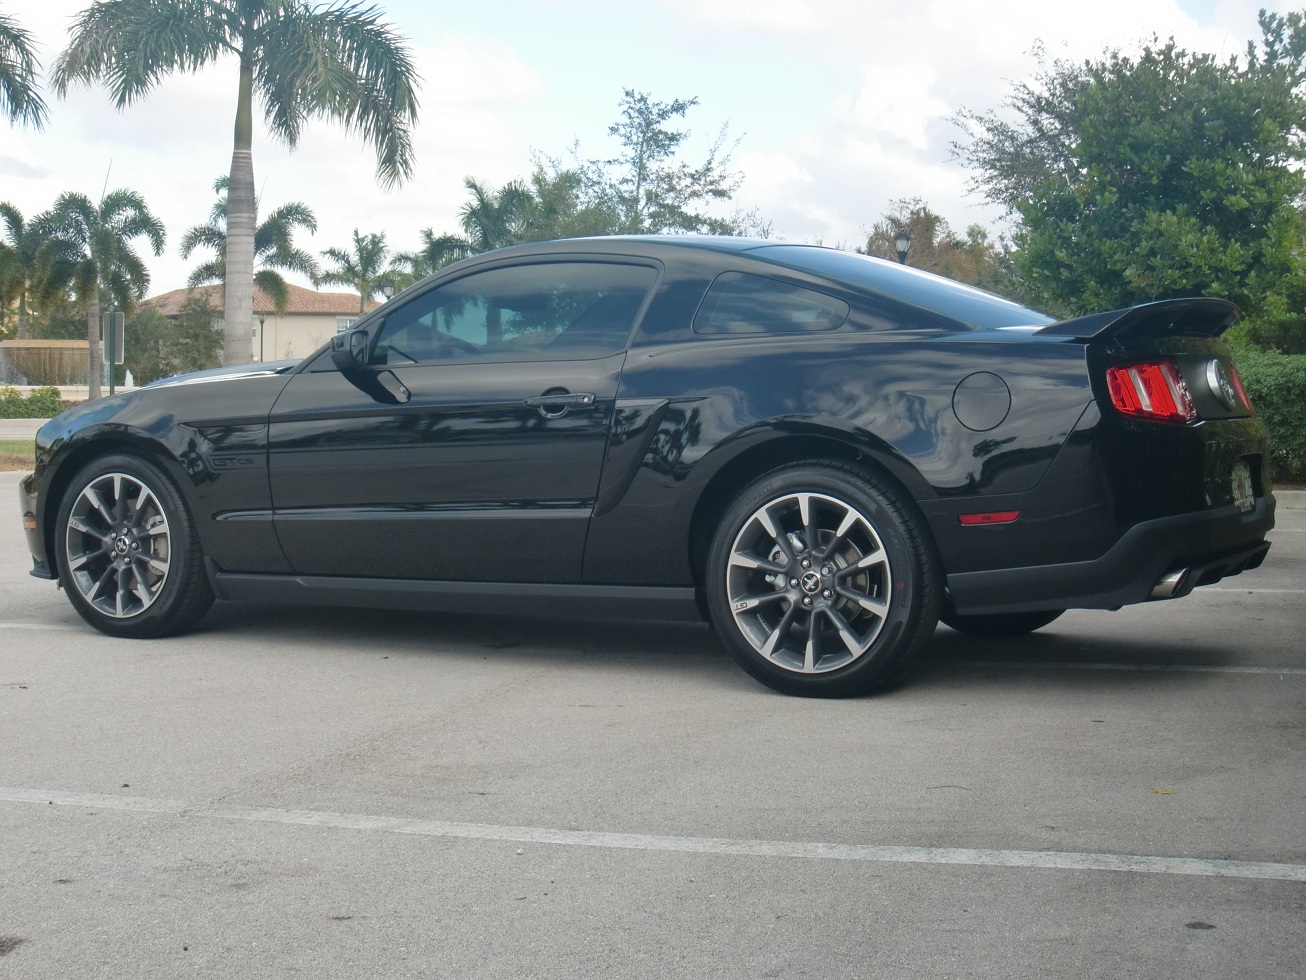 2012 Ford mustang gt quarter mile time